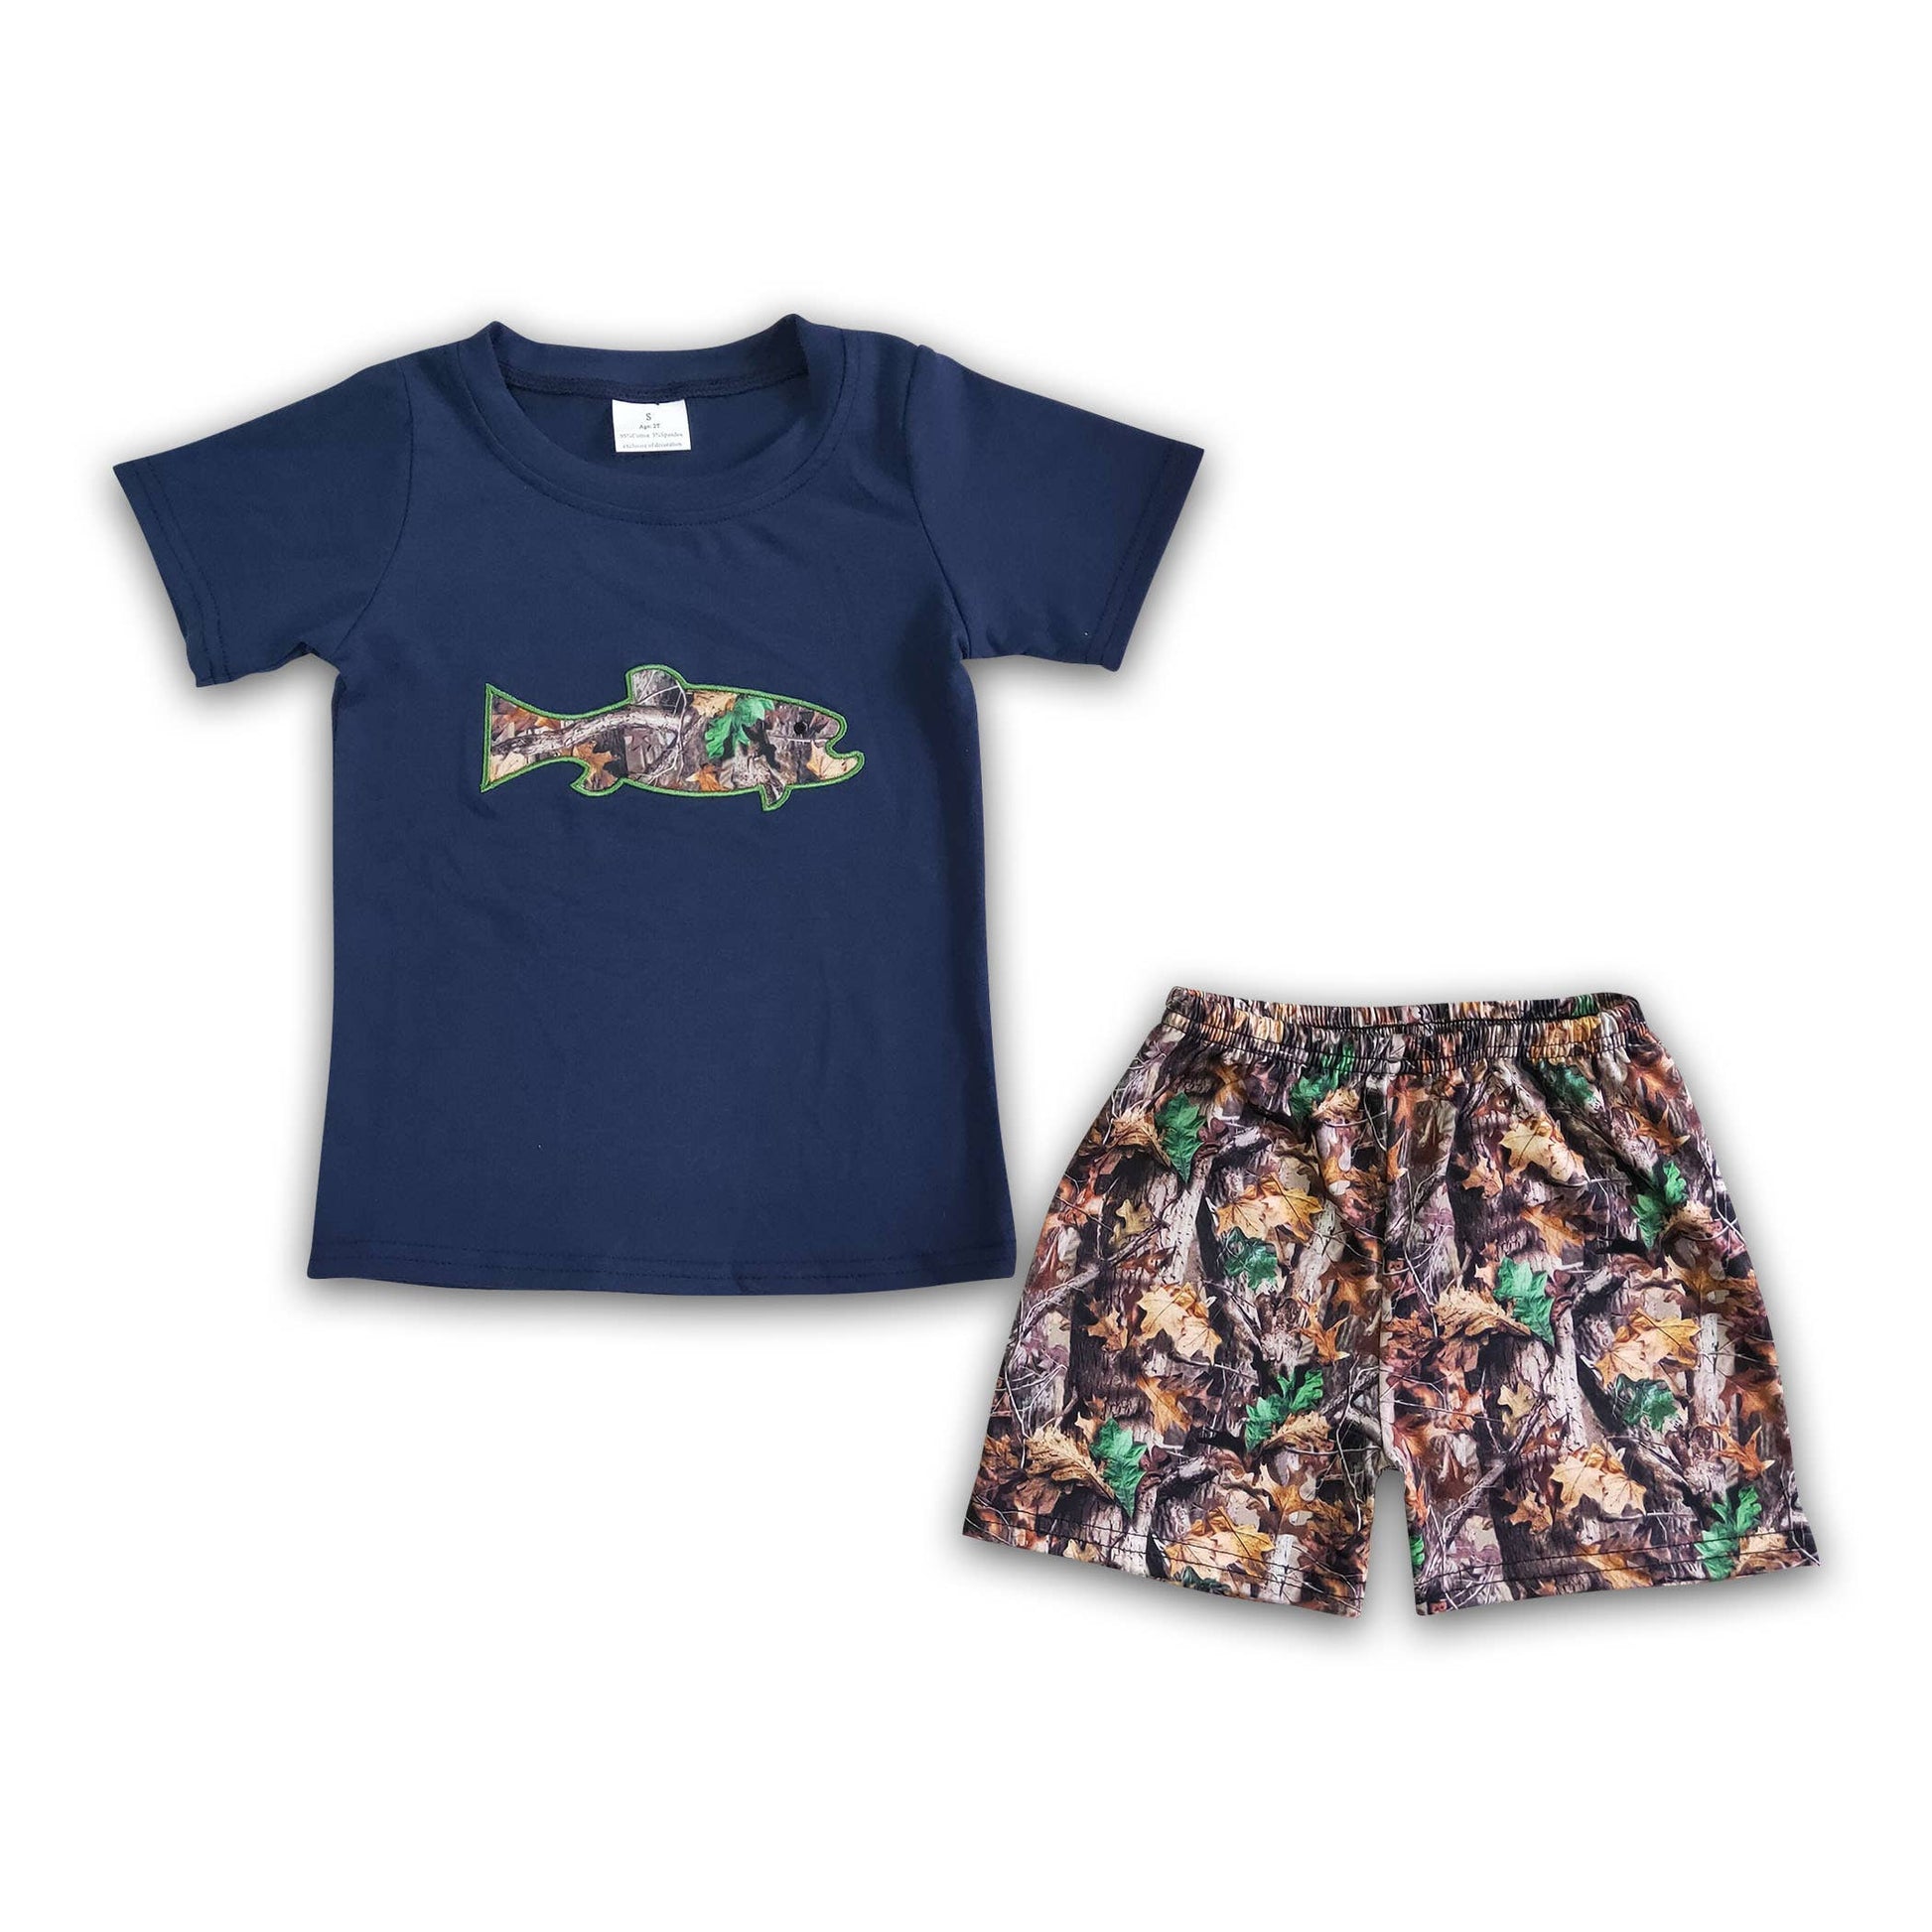 A boy's Fish embroidery cotton shirt camo shorts set with a fish print, by Yawoo Garments.